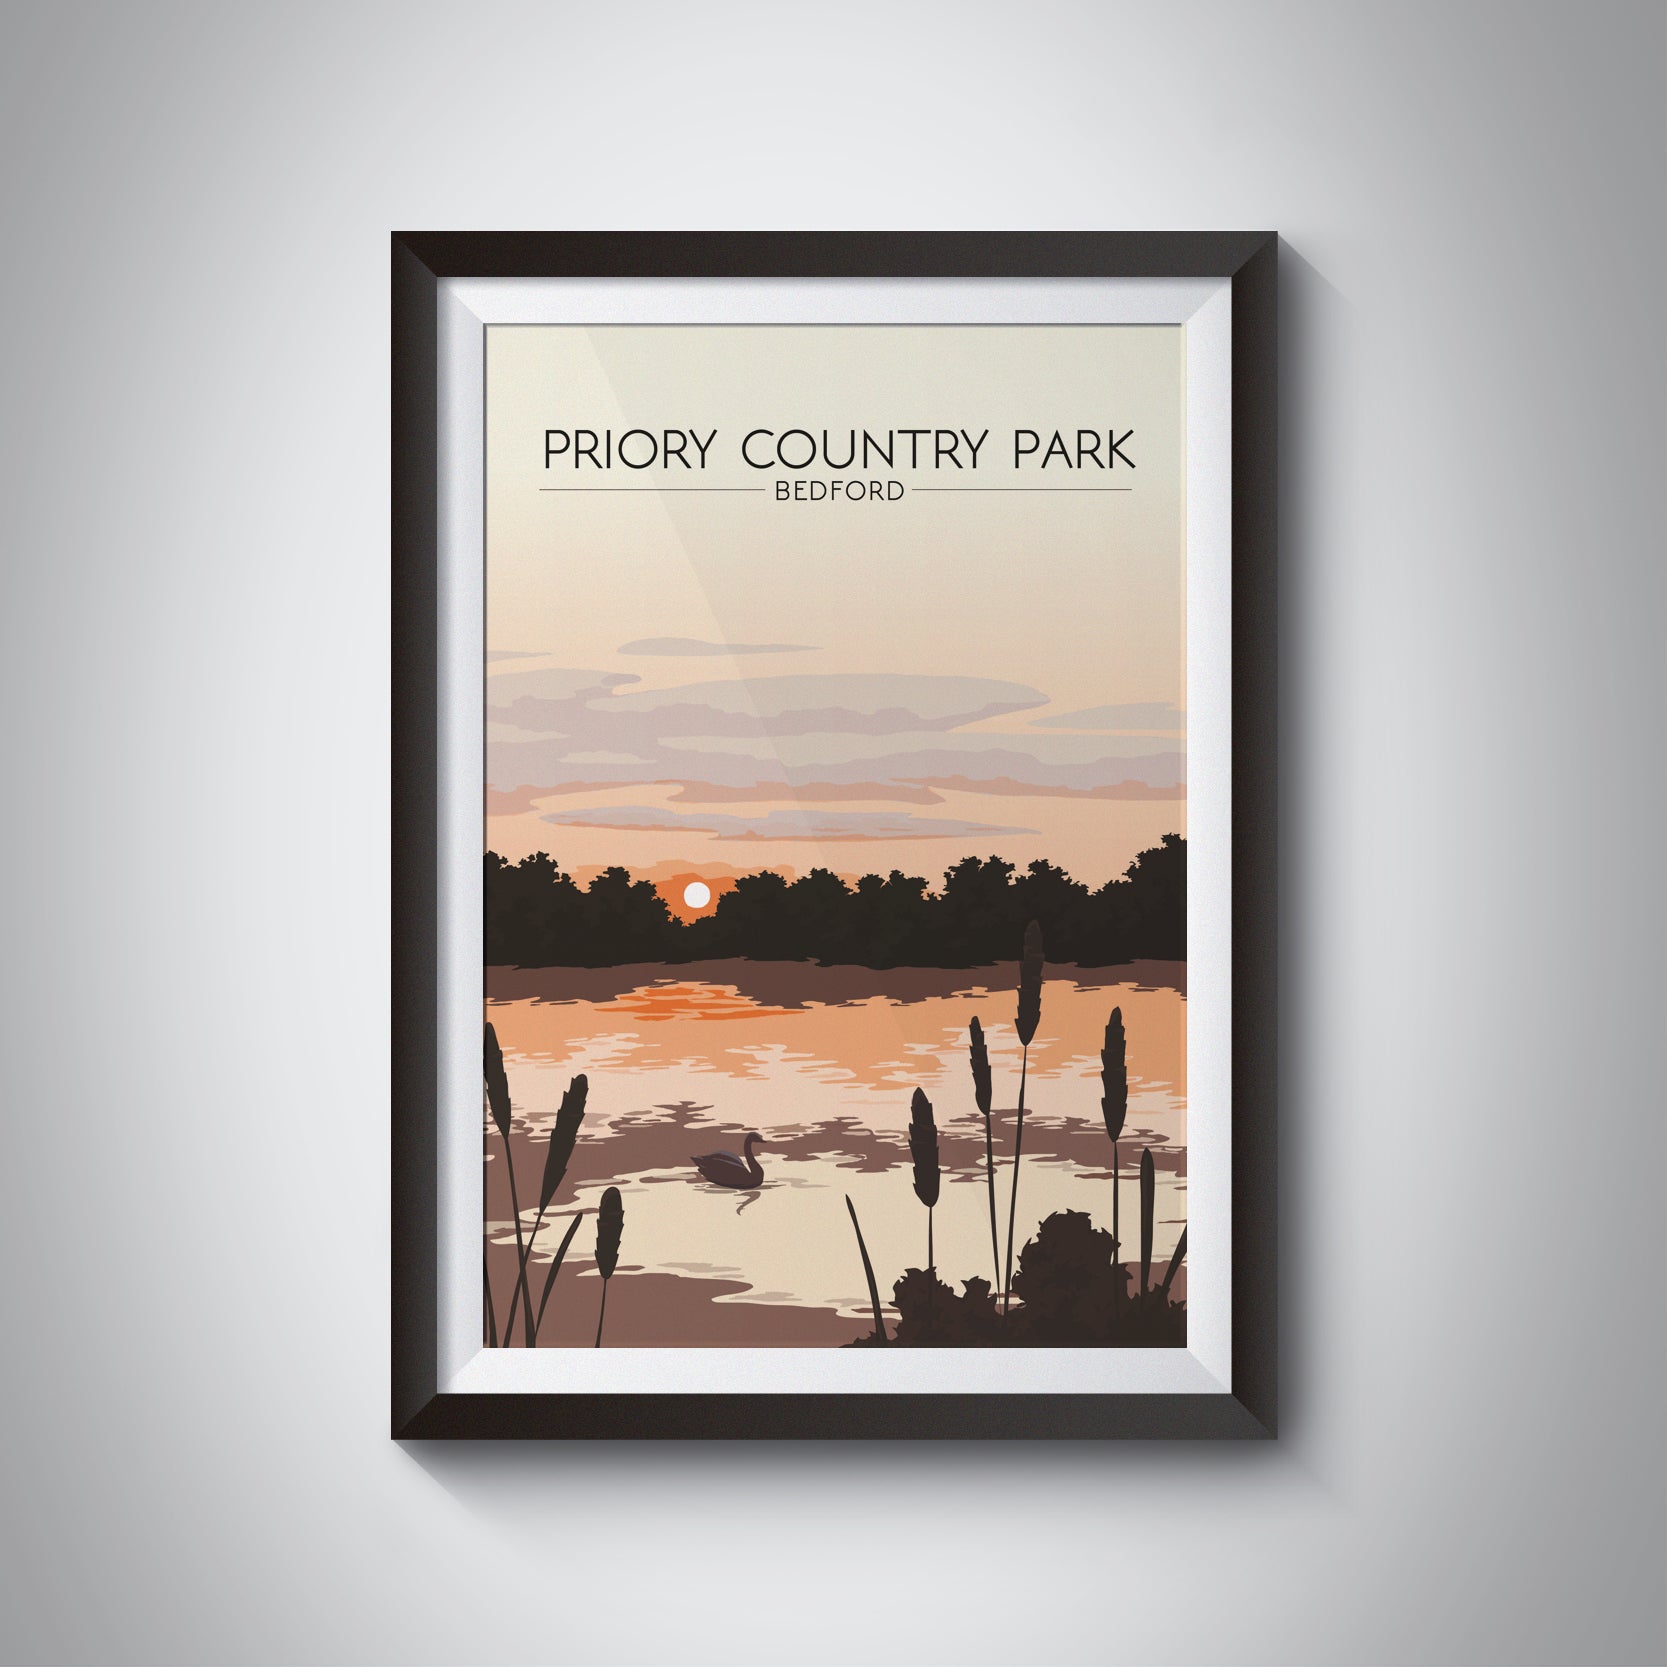 Priory Country Park, Bedford Travel Poster